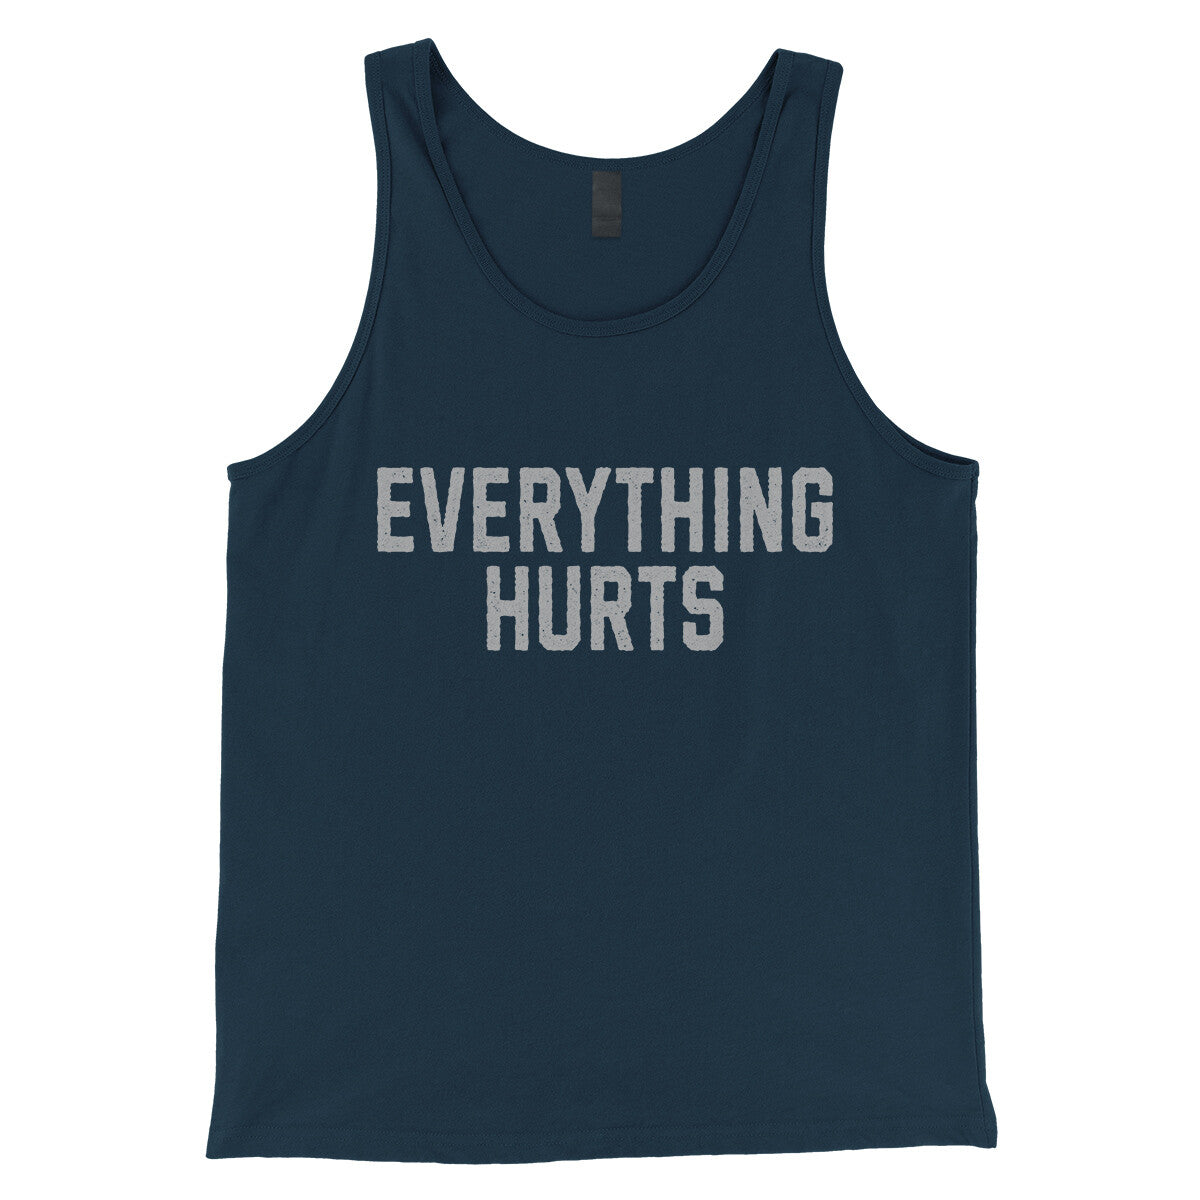 Everything Hurts in Navy Color